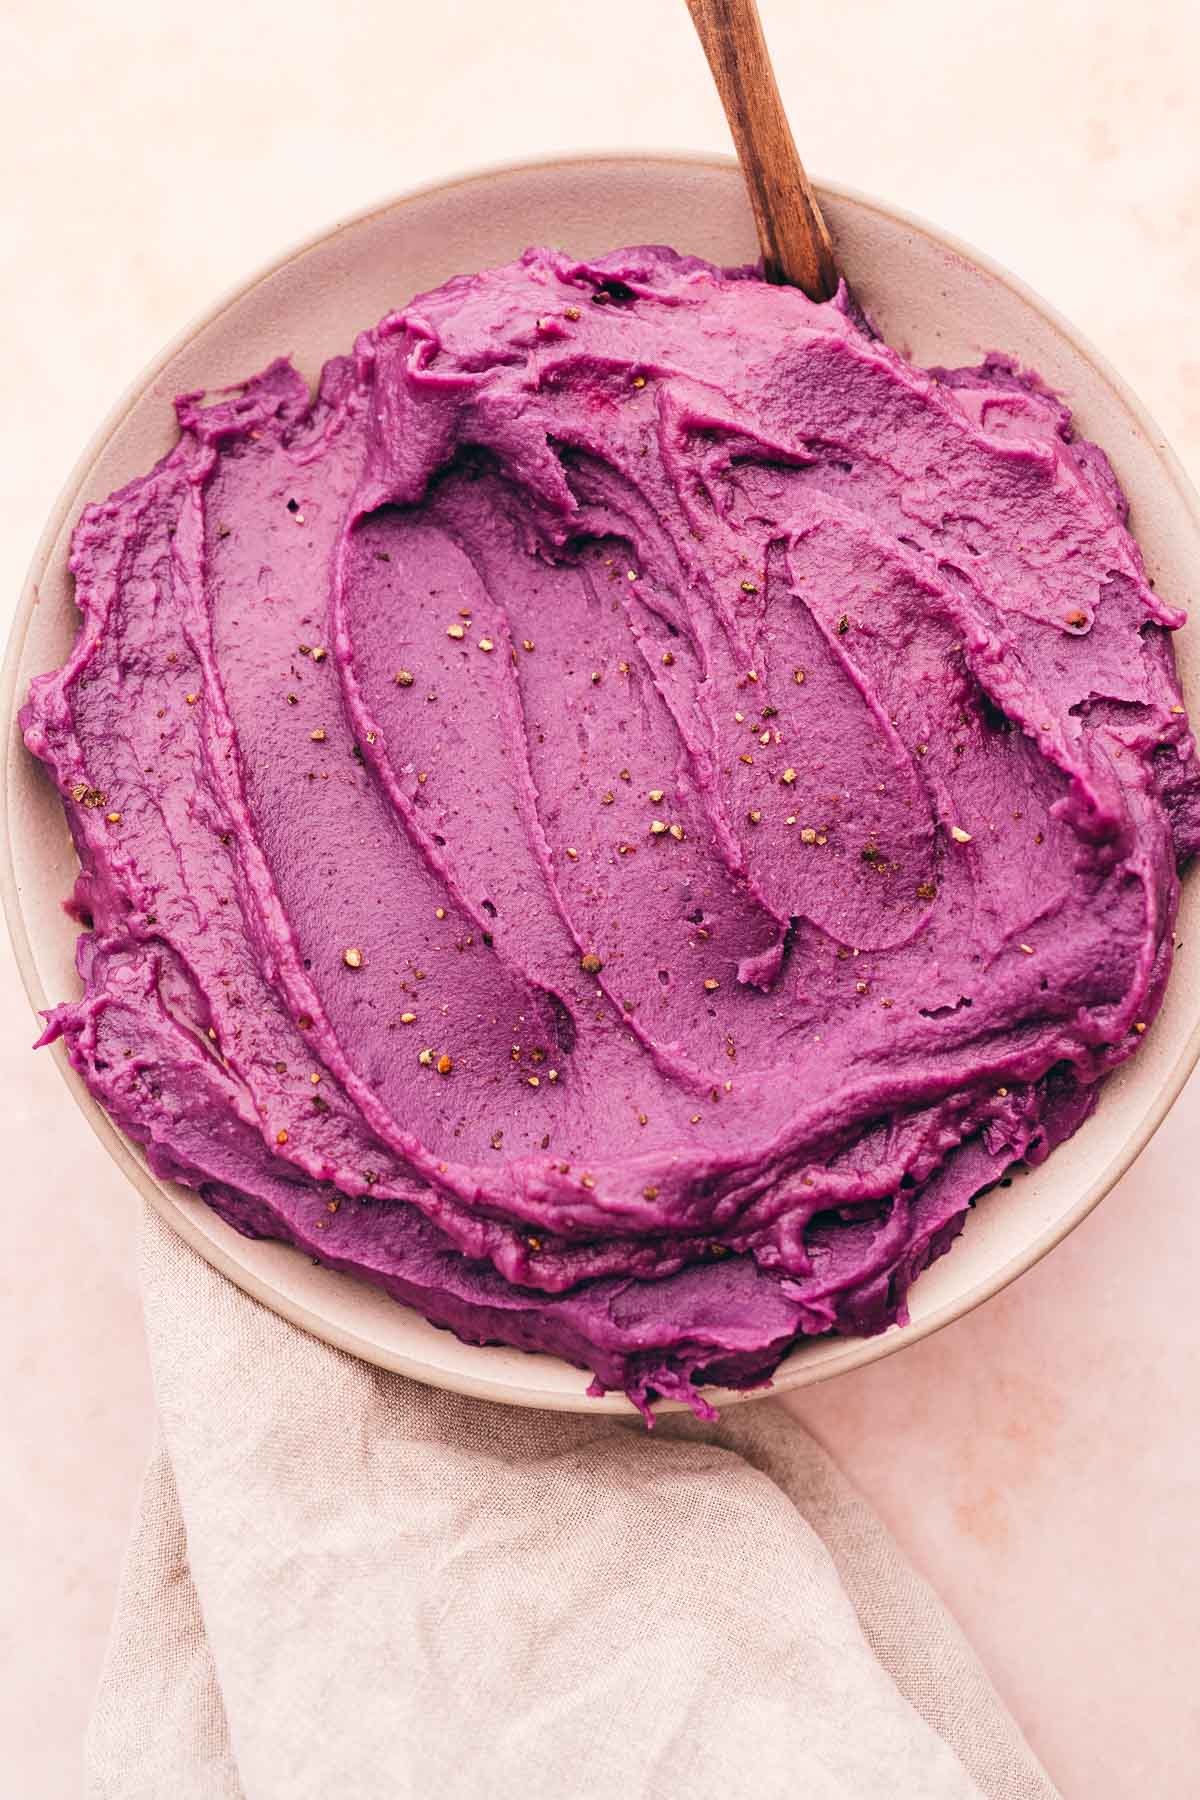 Mashed purple sweet potatoes hummus in a bowl with a wooden spoon.